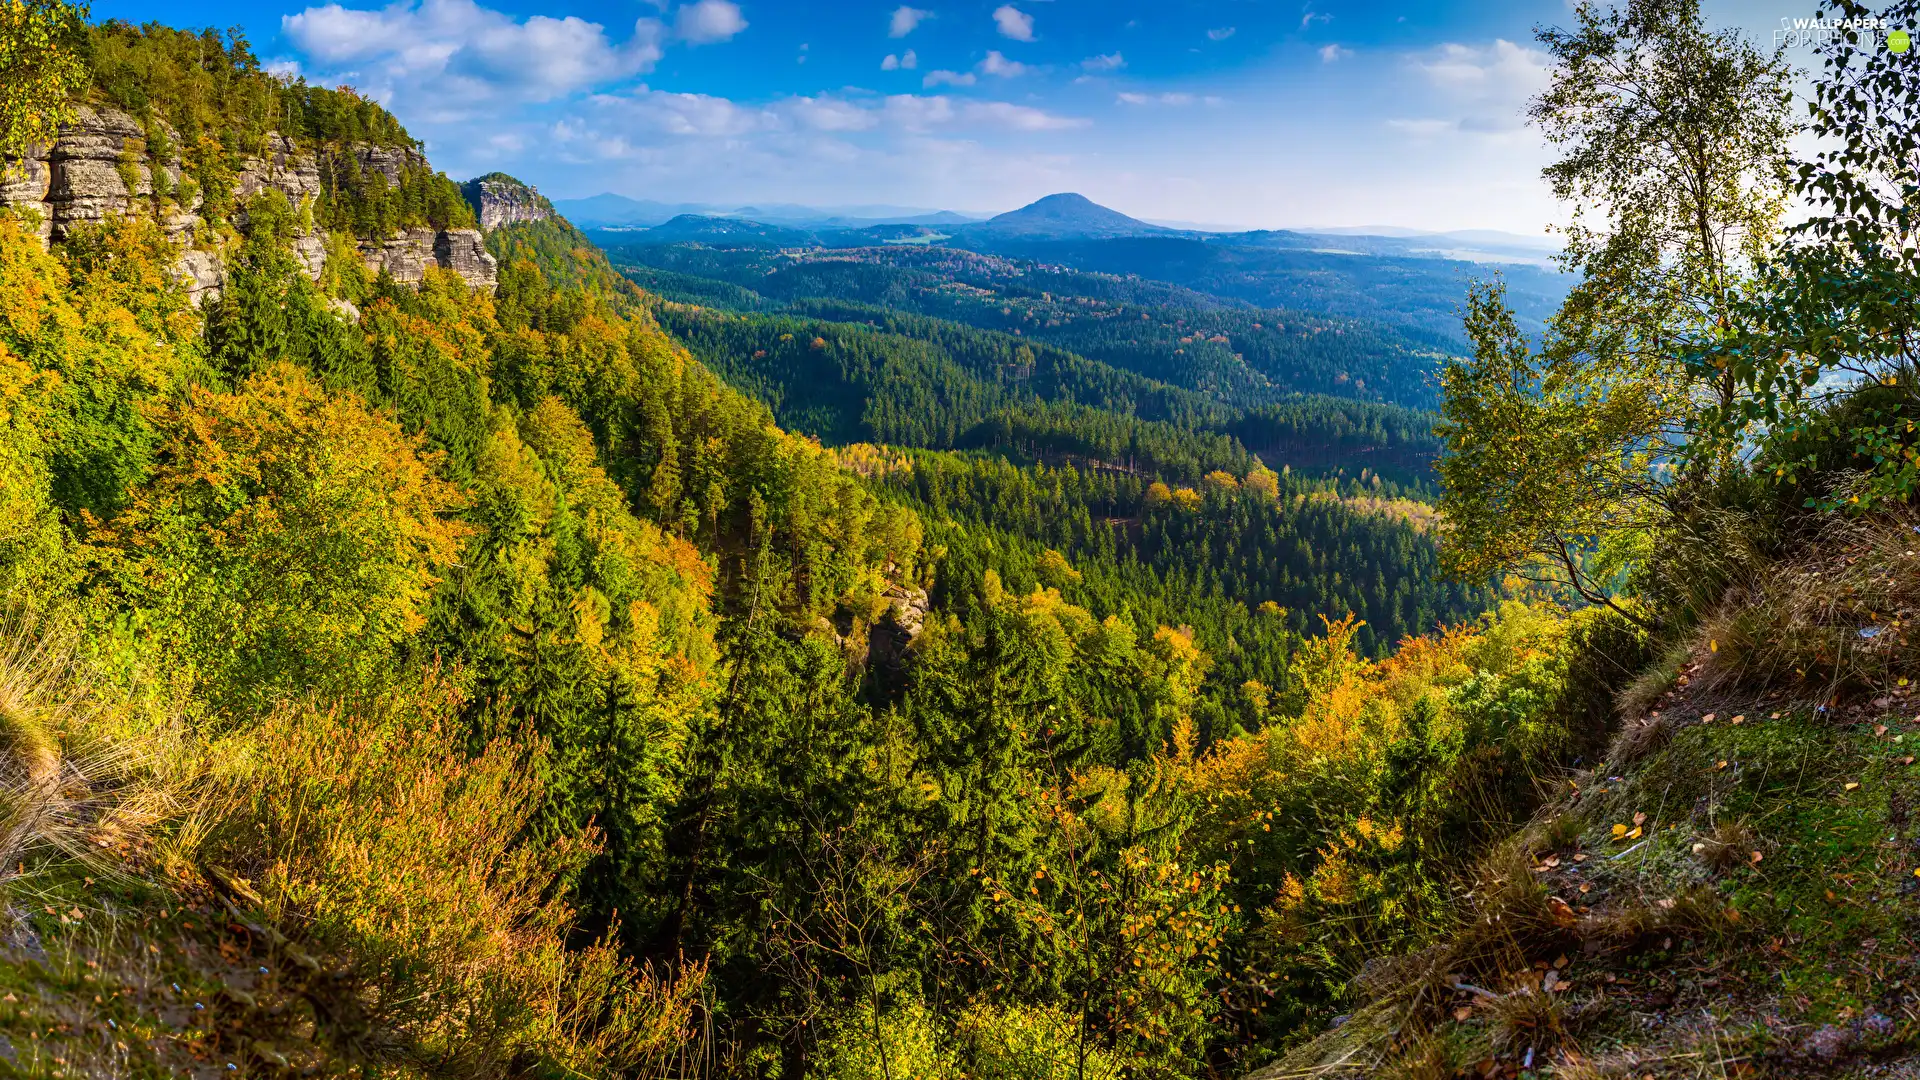 The Hills, trees, Mountains, viewes, woods, autumn, Rocks